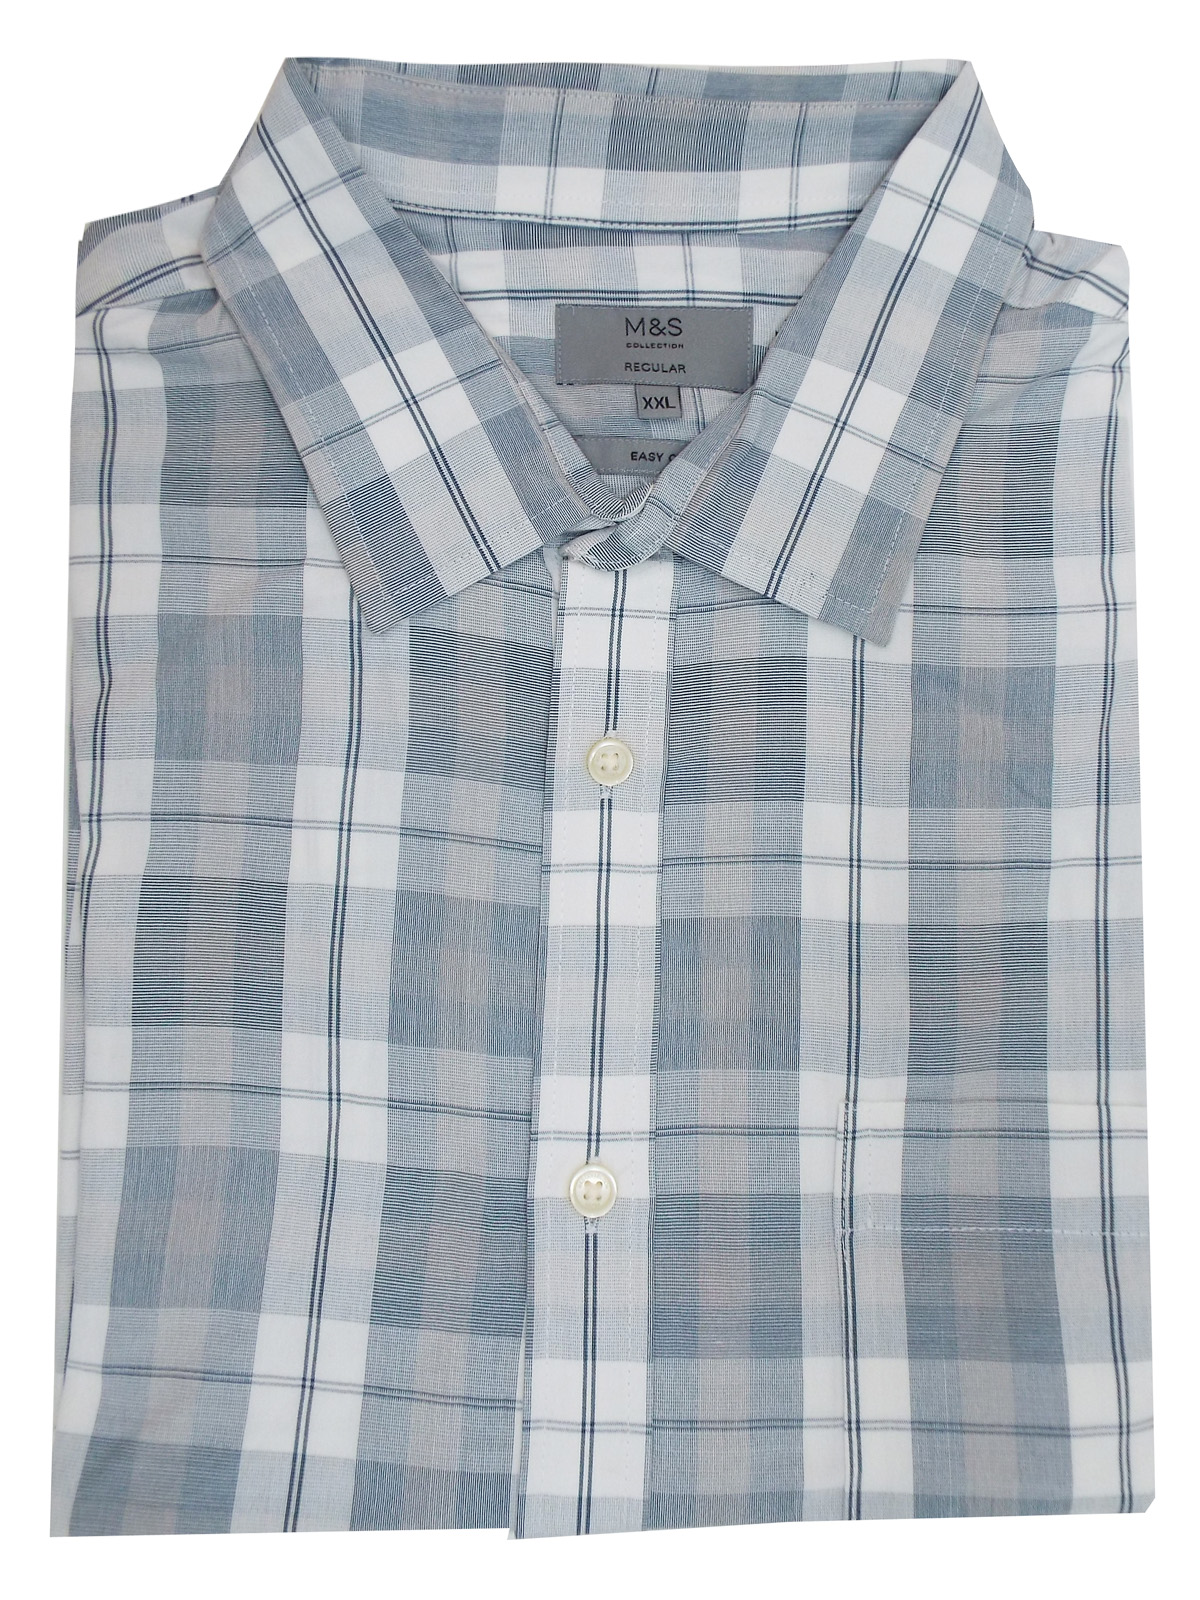 Marks and Spencer - - M&5 GREY Mens Pure Cotton Regular Fit Checked ...